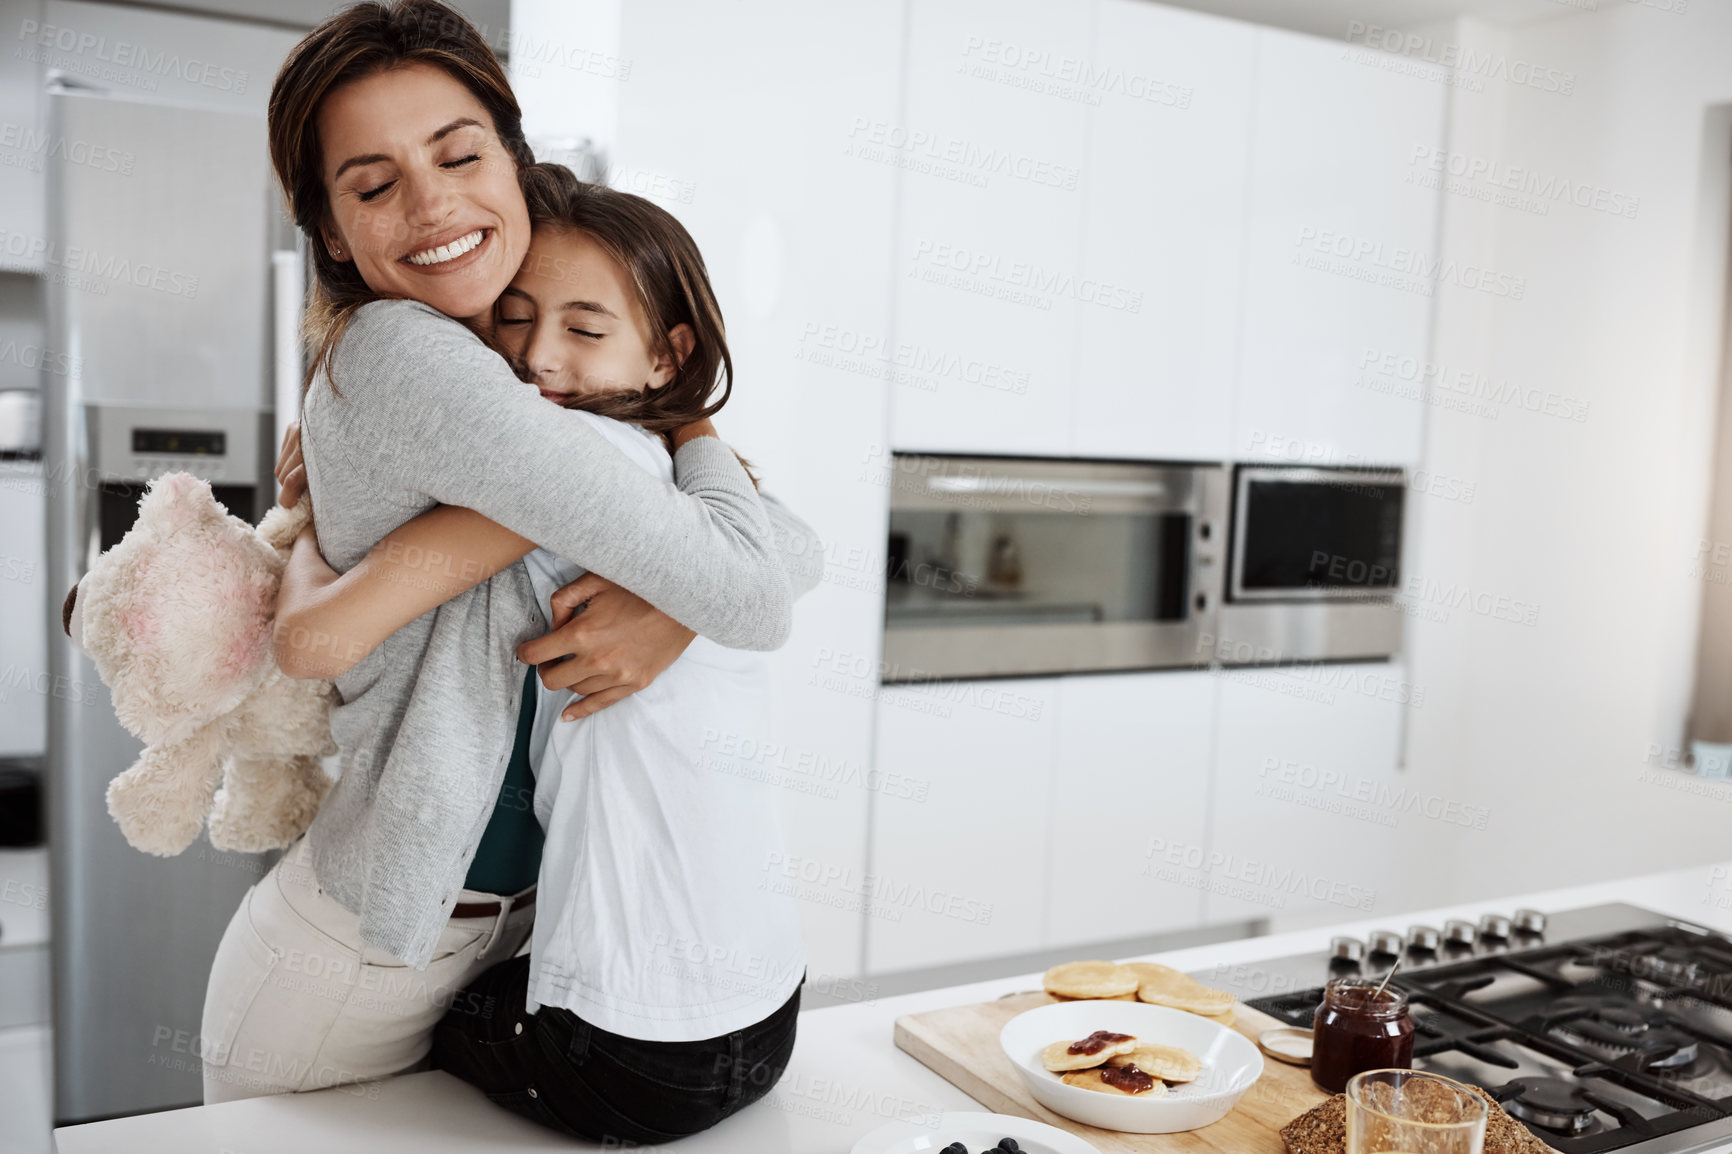 Buy stock photo Cropped shot of an attractive young woman and her daughter hugging while spending time together at home